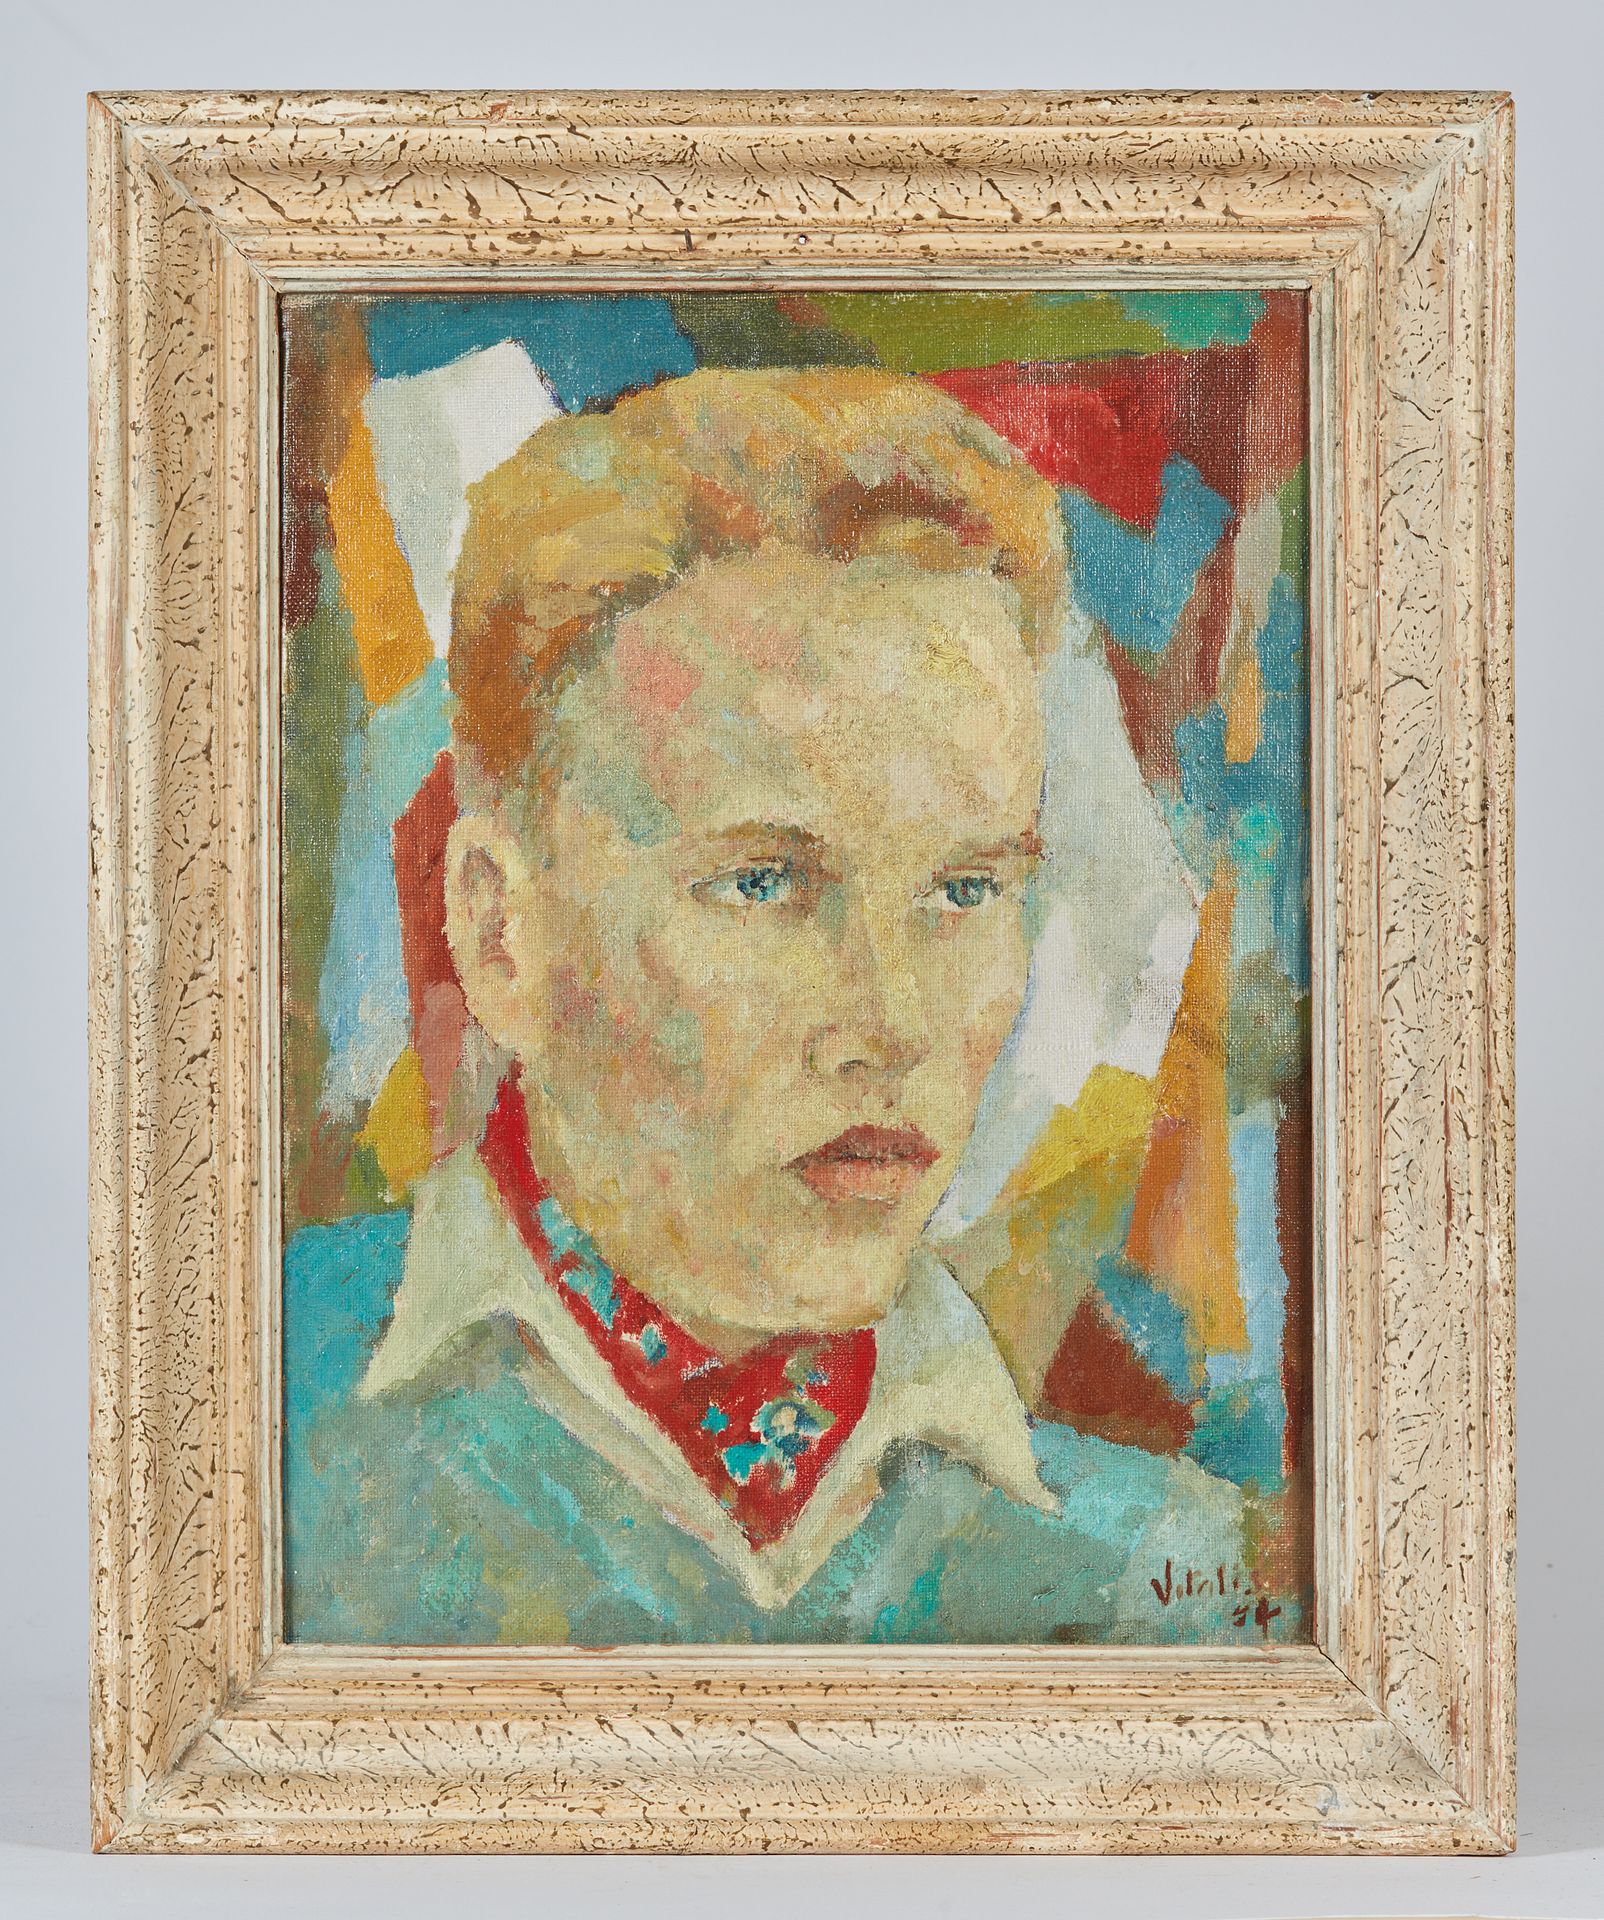 Null Macario VITALIS (1898-1990)

Portrait of a man with a red scarf

Canvas sig&hellip;